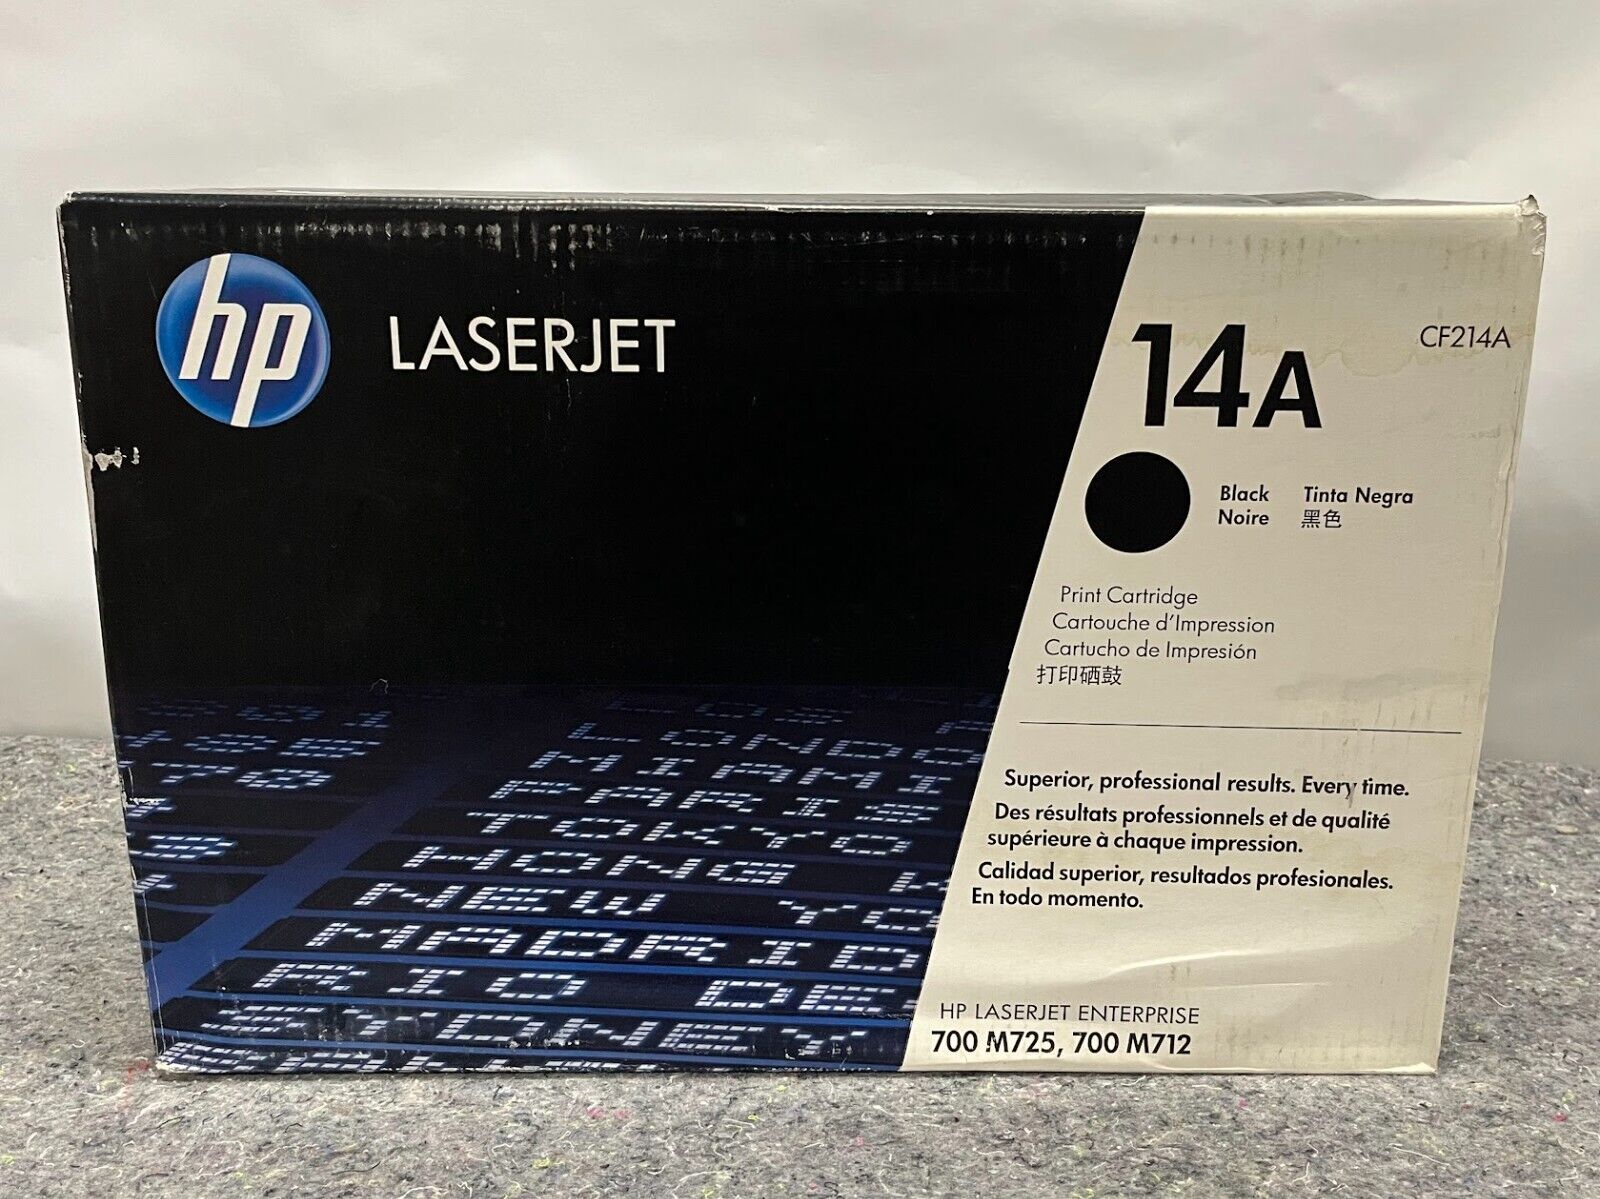 Genuine HP LaserJet 14A Black Toner Cartridge CF214A (NEW, WATER STAINED)